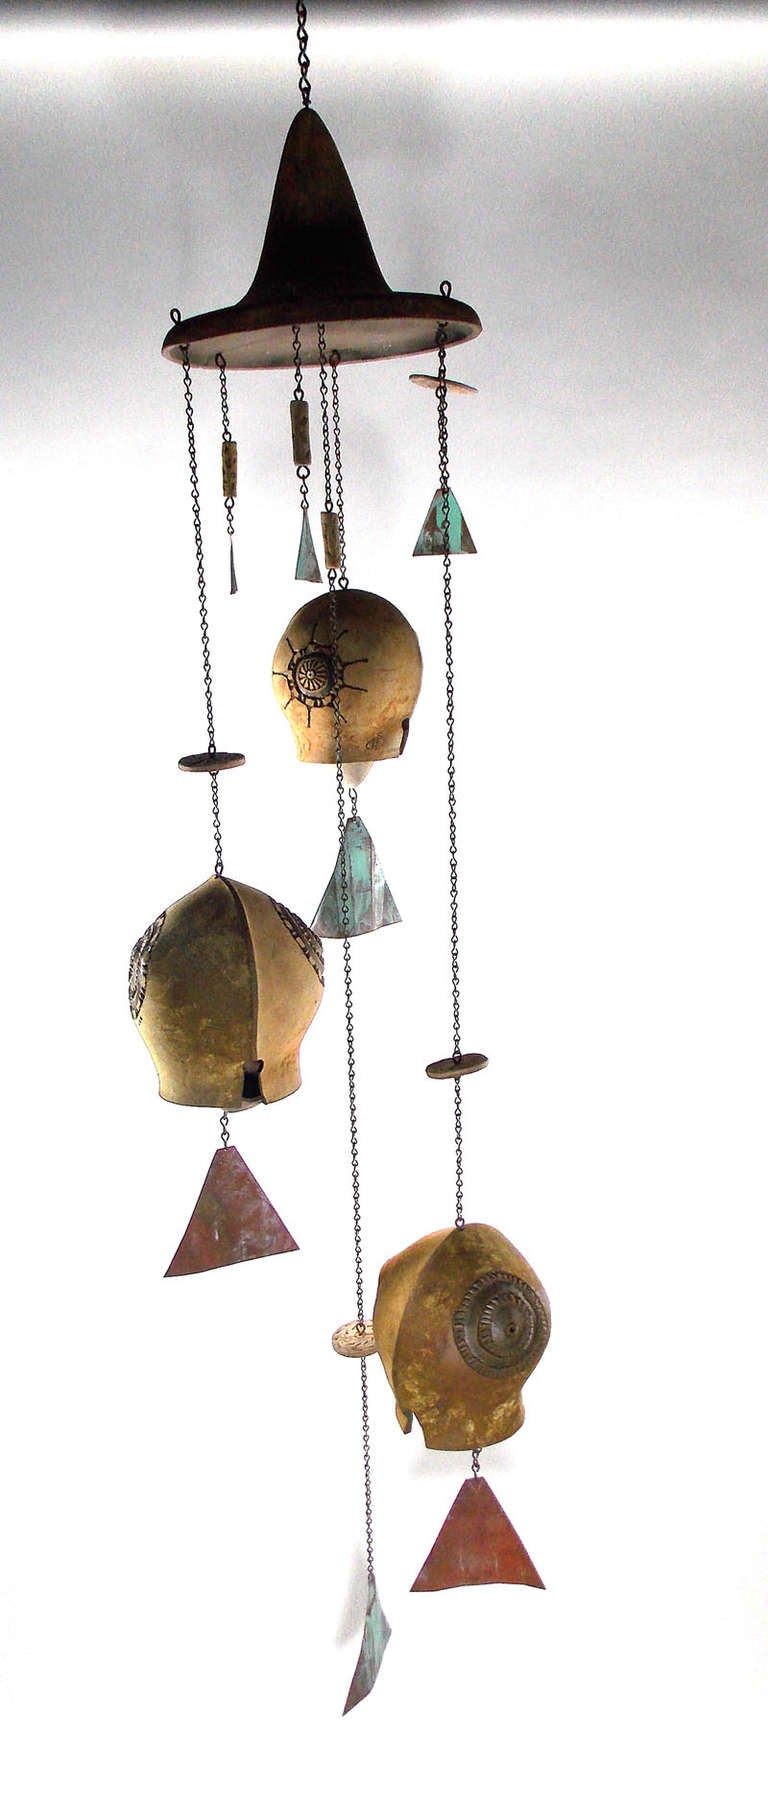 Paolo Soleri was an architect,urban designer,artist and craftsman.
He came to america in 1945,taking a fellowship withFrank LLoyd Wright in 1947.
This is an early and superior wind chime crafted at C.A.S. (Ceramica Artistica Solimene)
Ceramic and